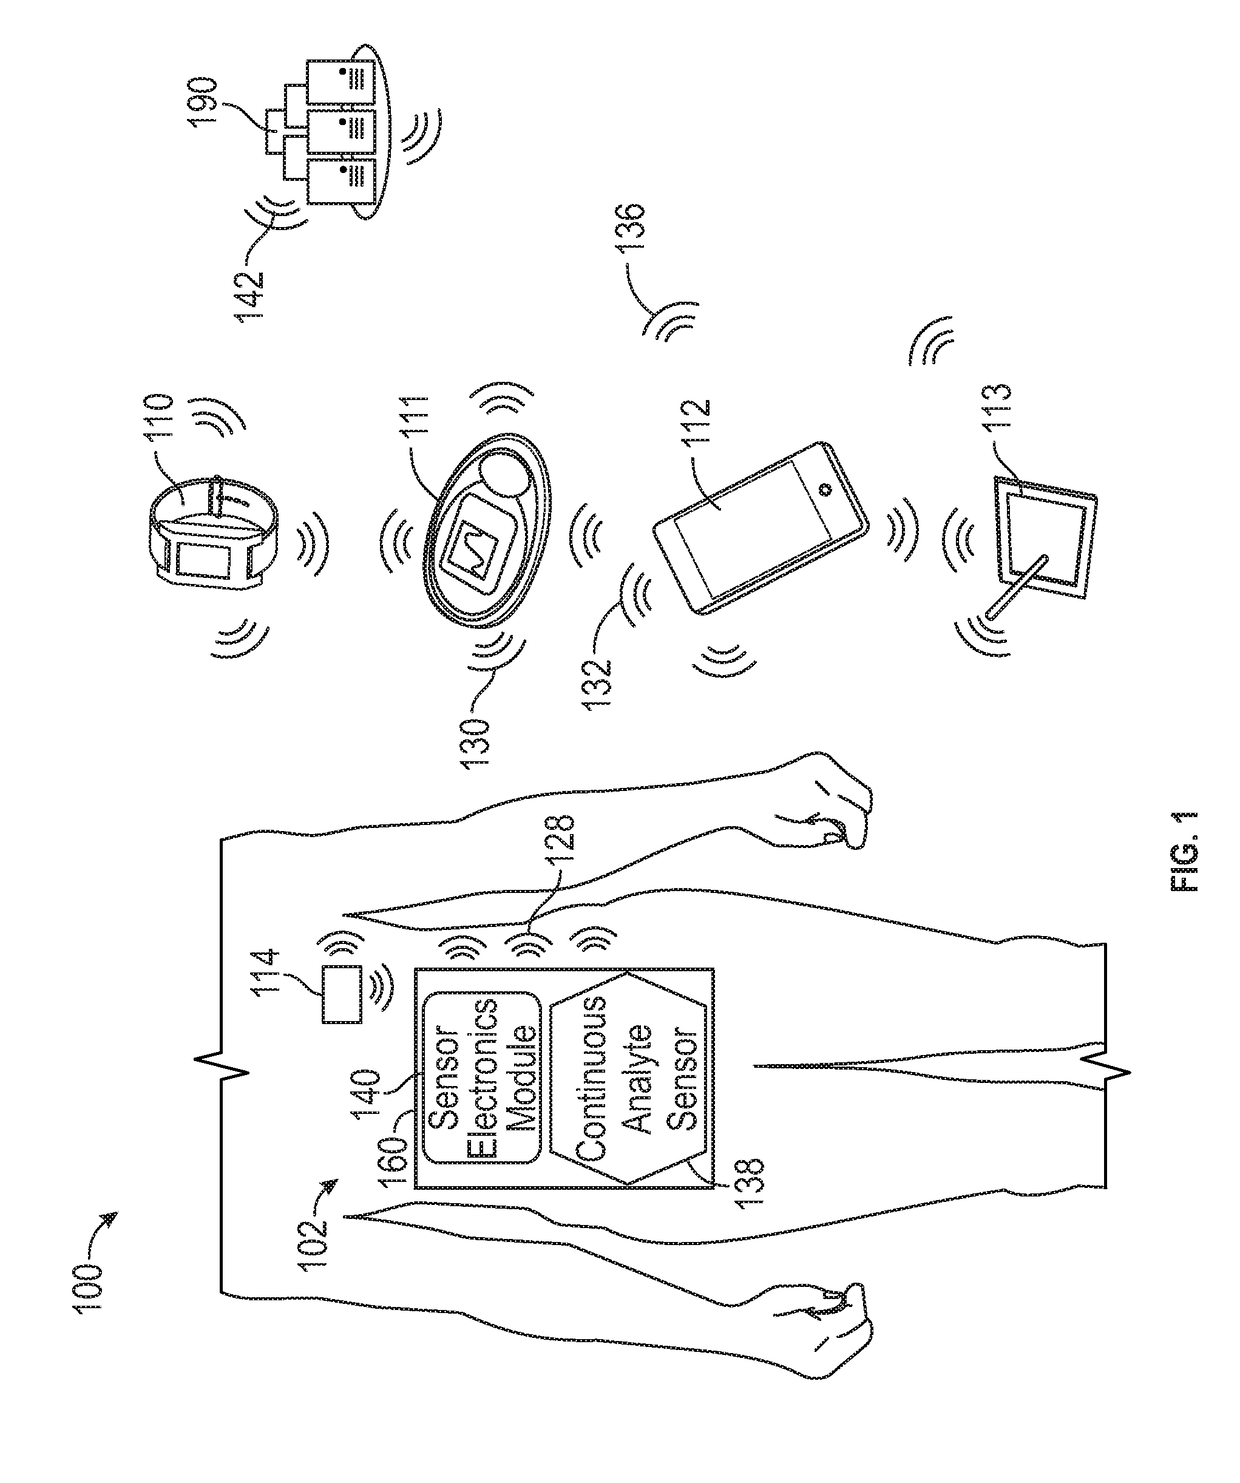 Transcutaneous analyte sensors, applicators therefor, and associated methods